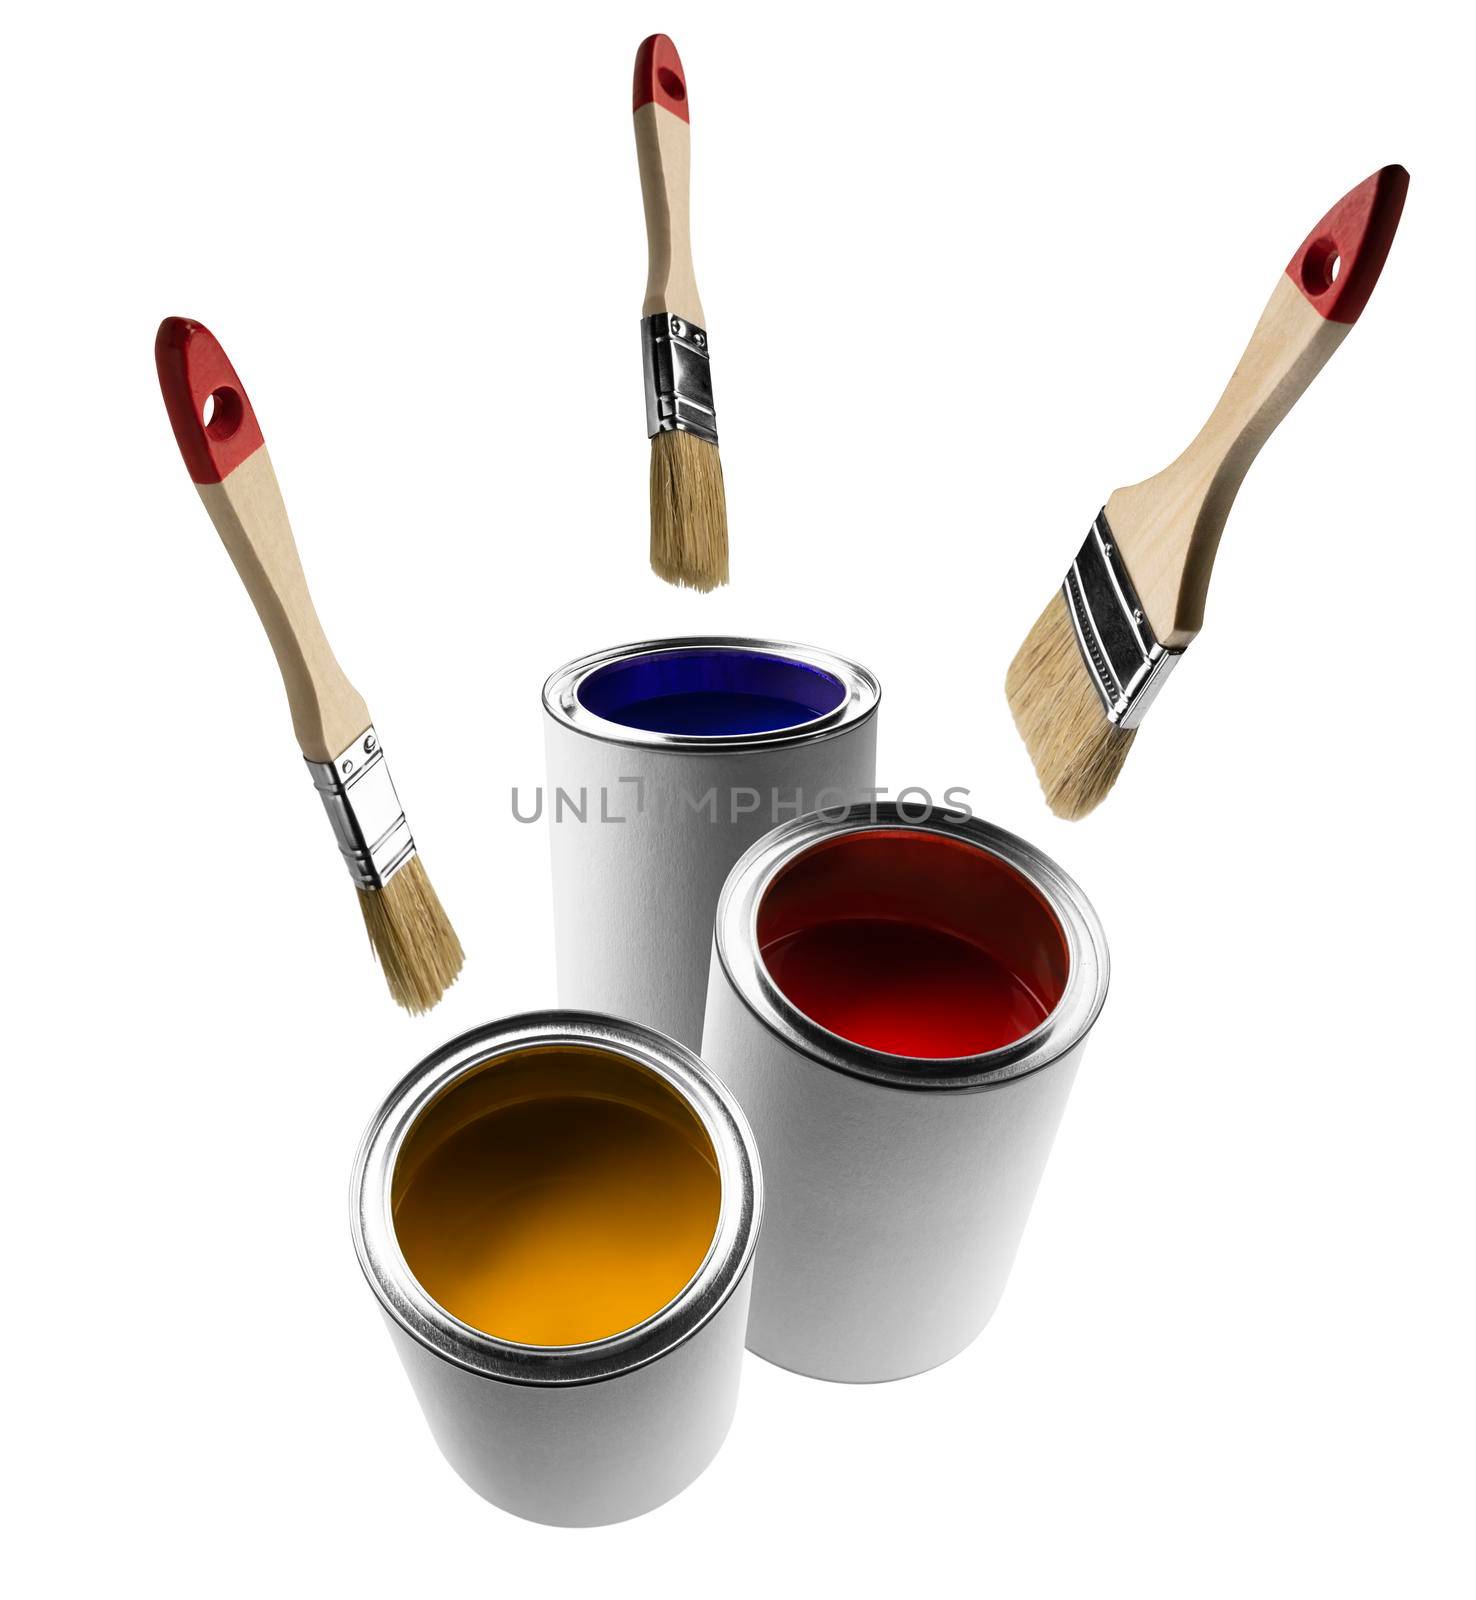 Paint cans and levitating brushes on a white background by butenkow